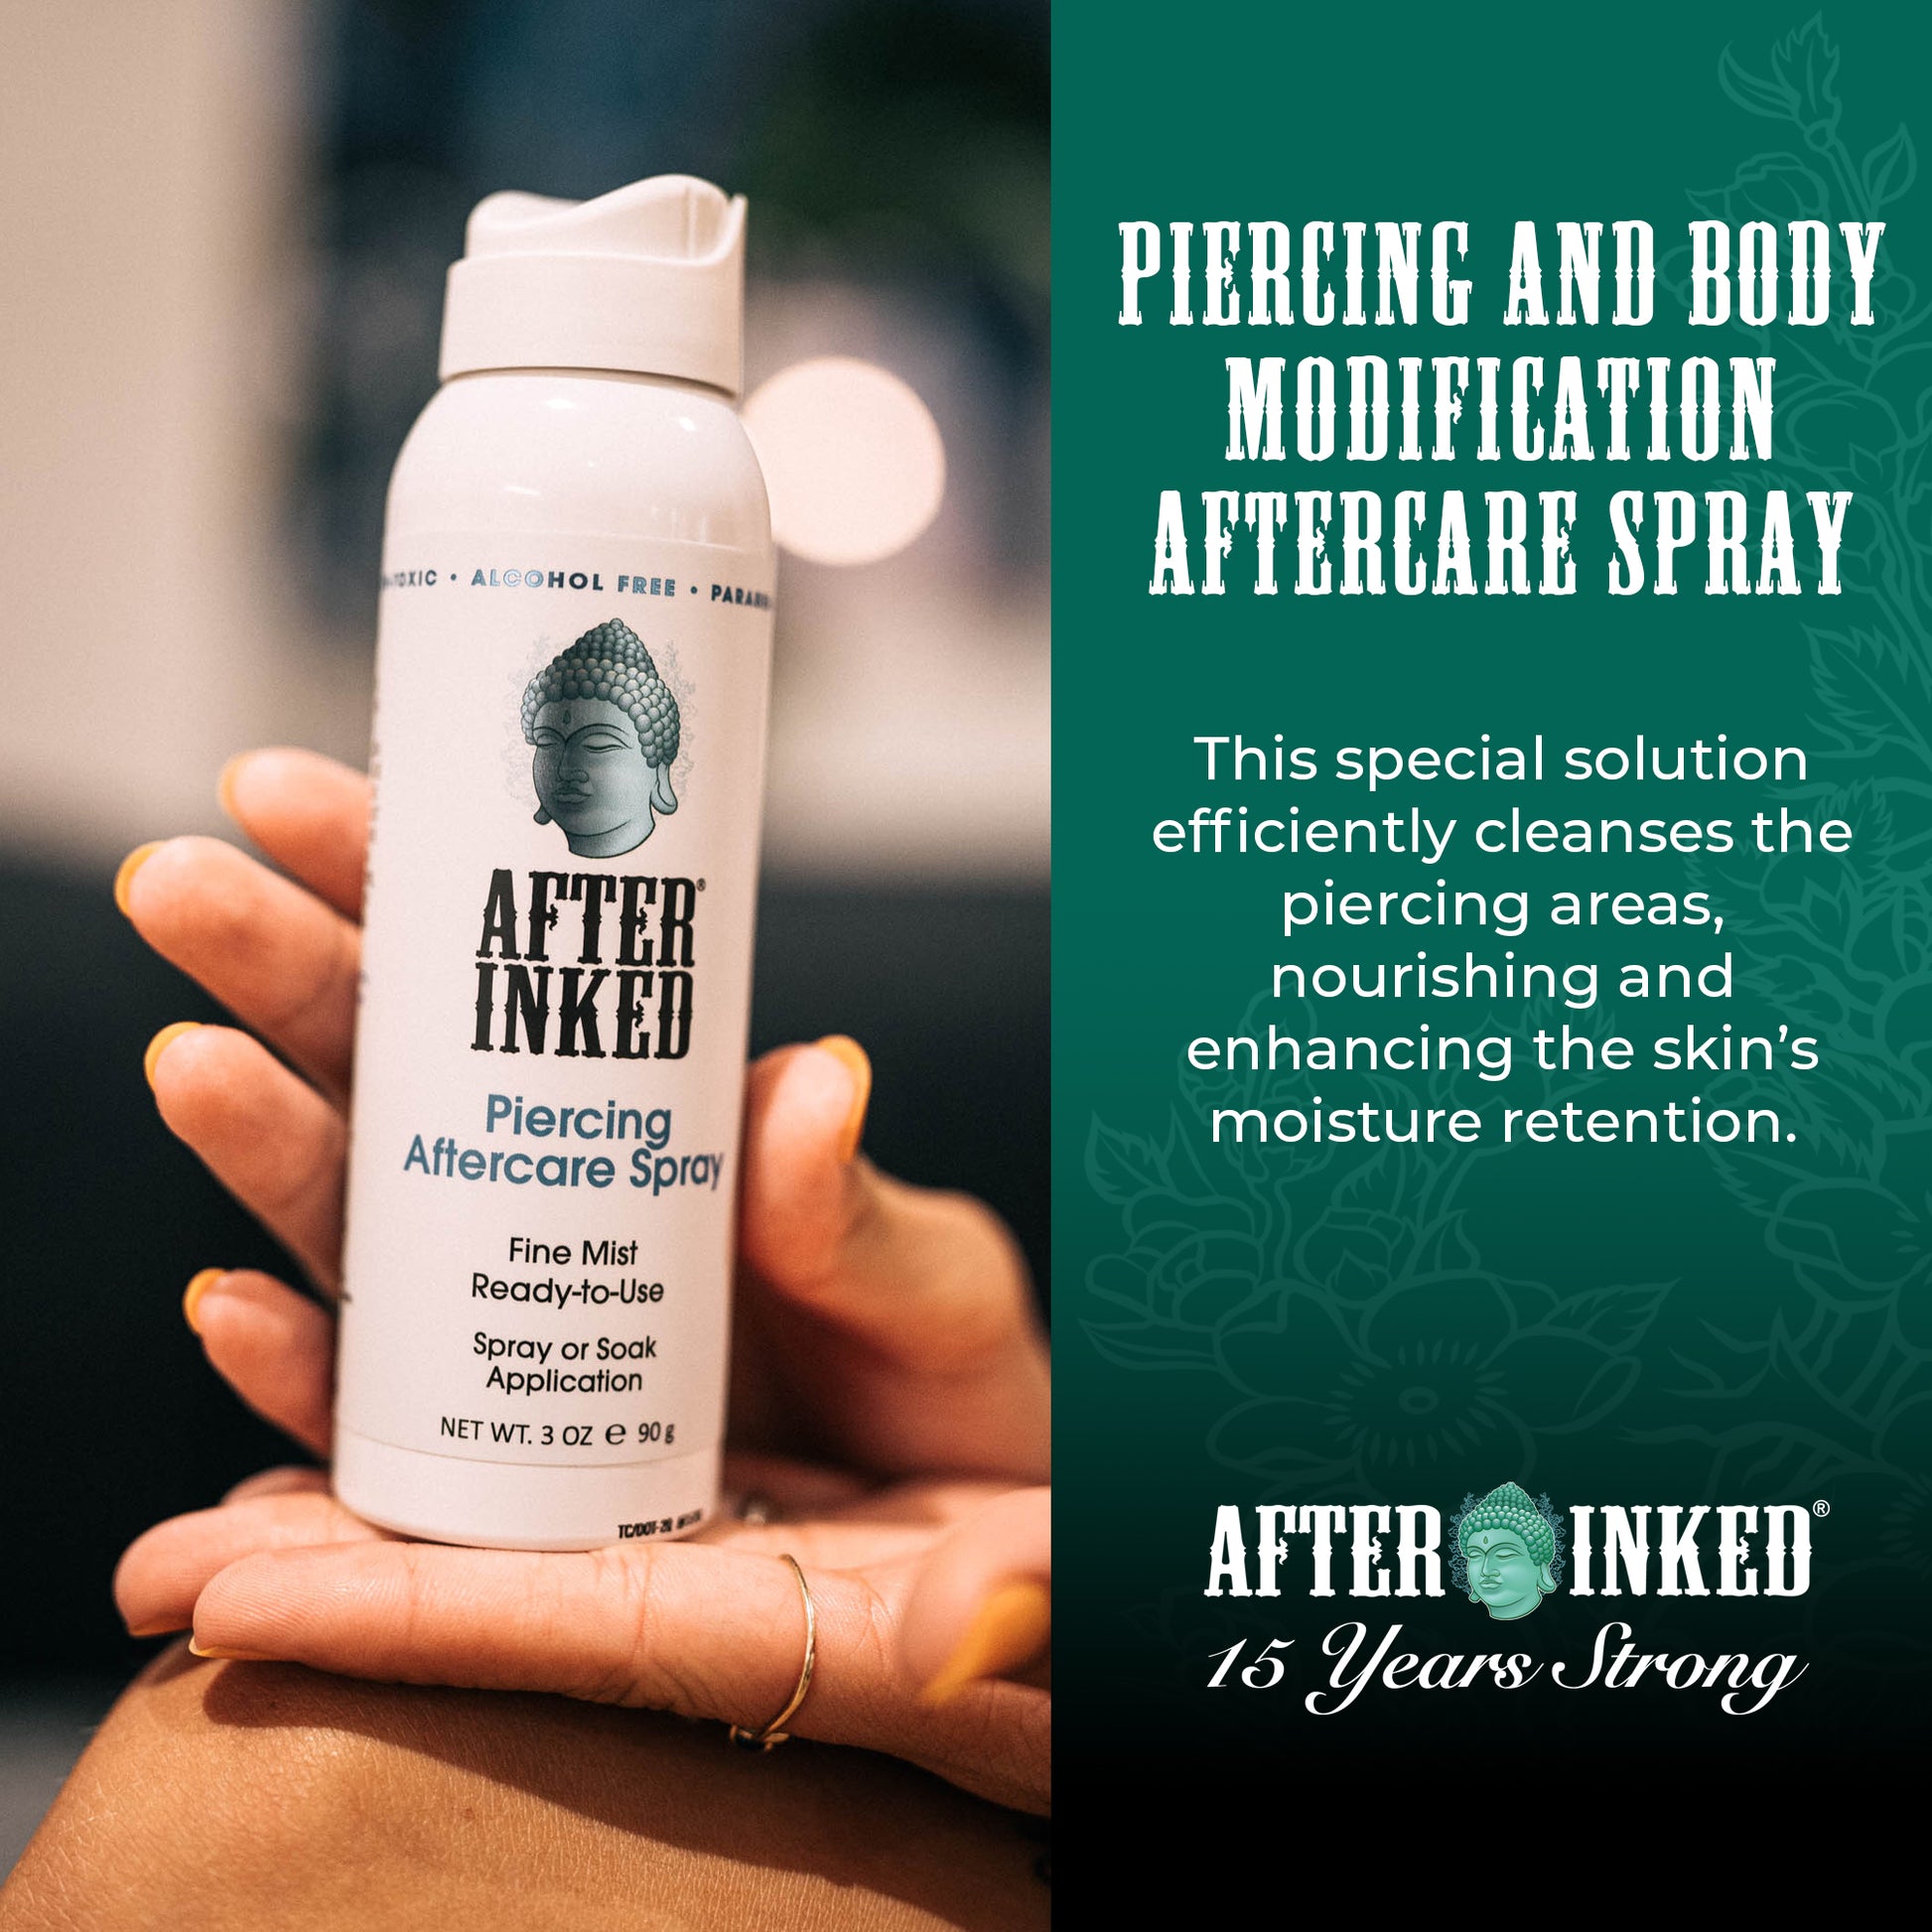 Piercing and body modification aftercare spray. This special solution efficiently cleanses the pier ing areas, nourishing and enhancing the skin's moisture retention.